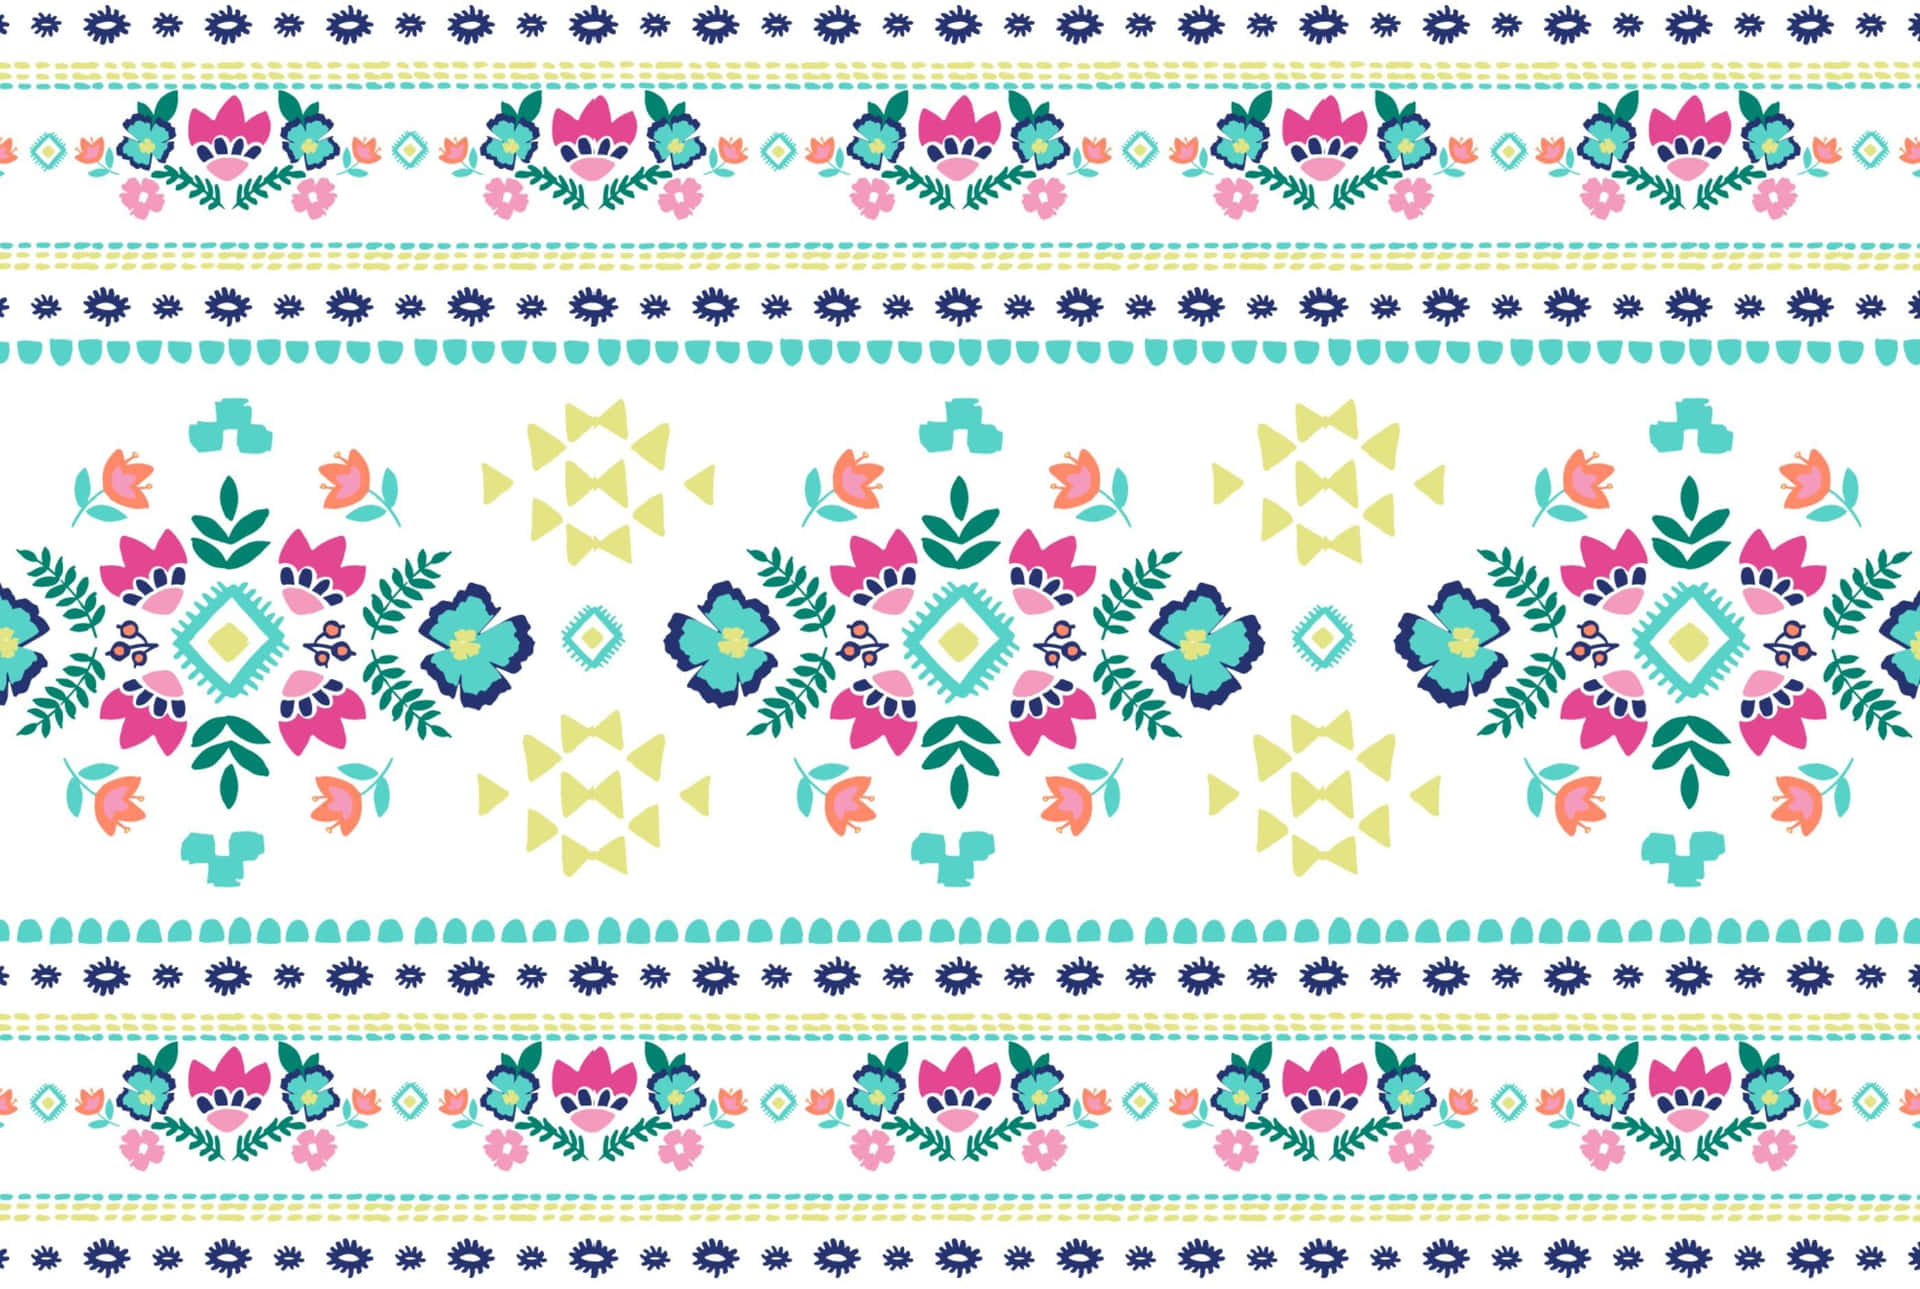 A Colorful Embroidered Pattern With Flowers And Leaves Wallpaper